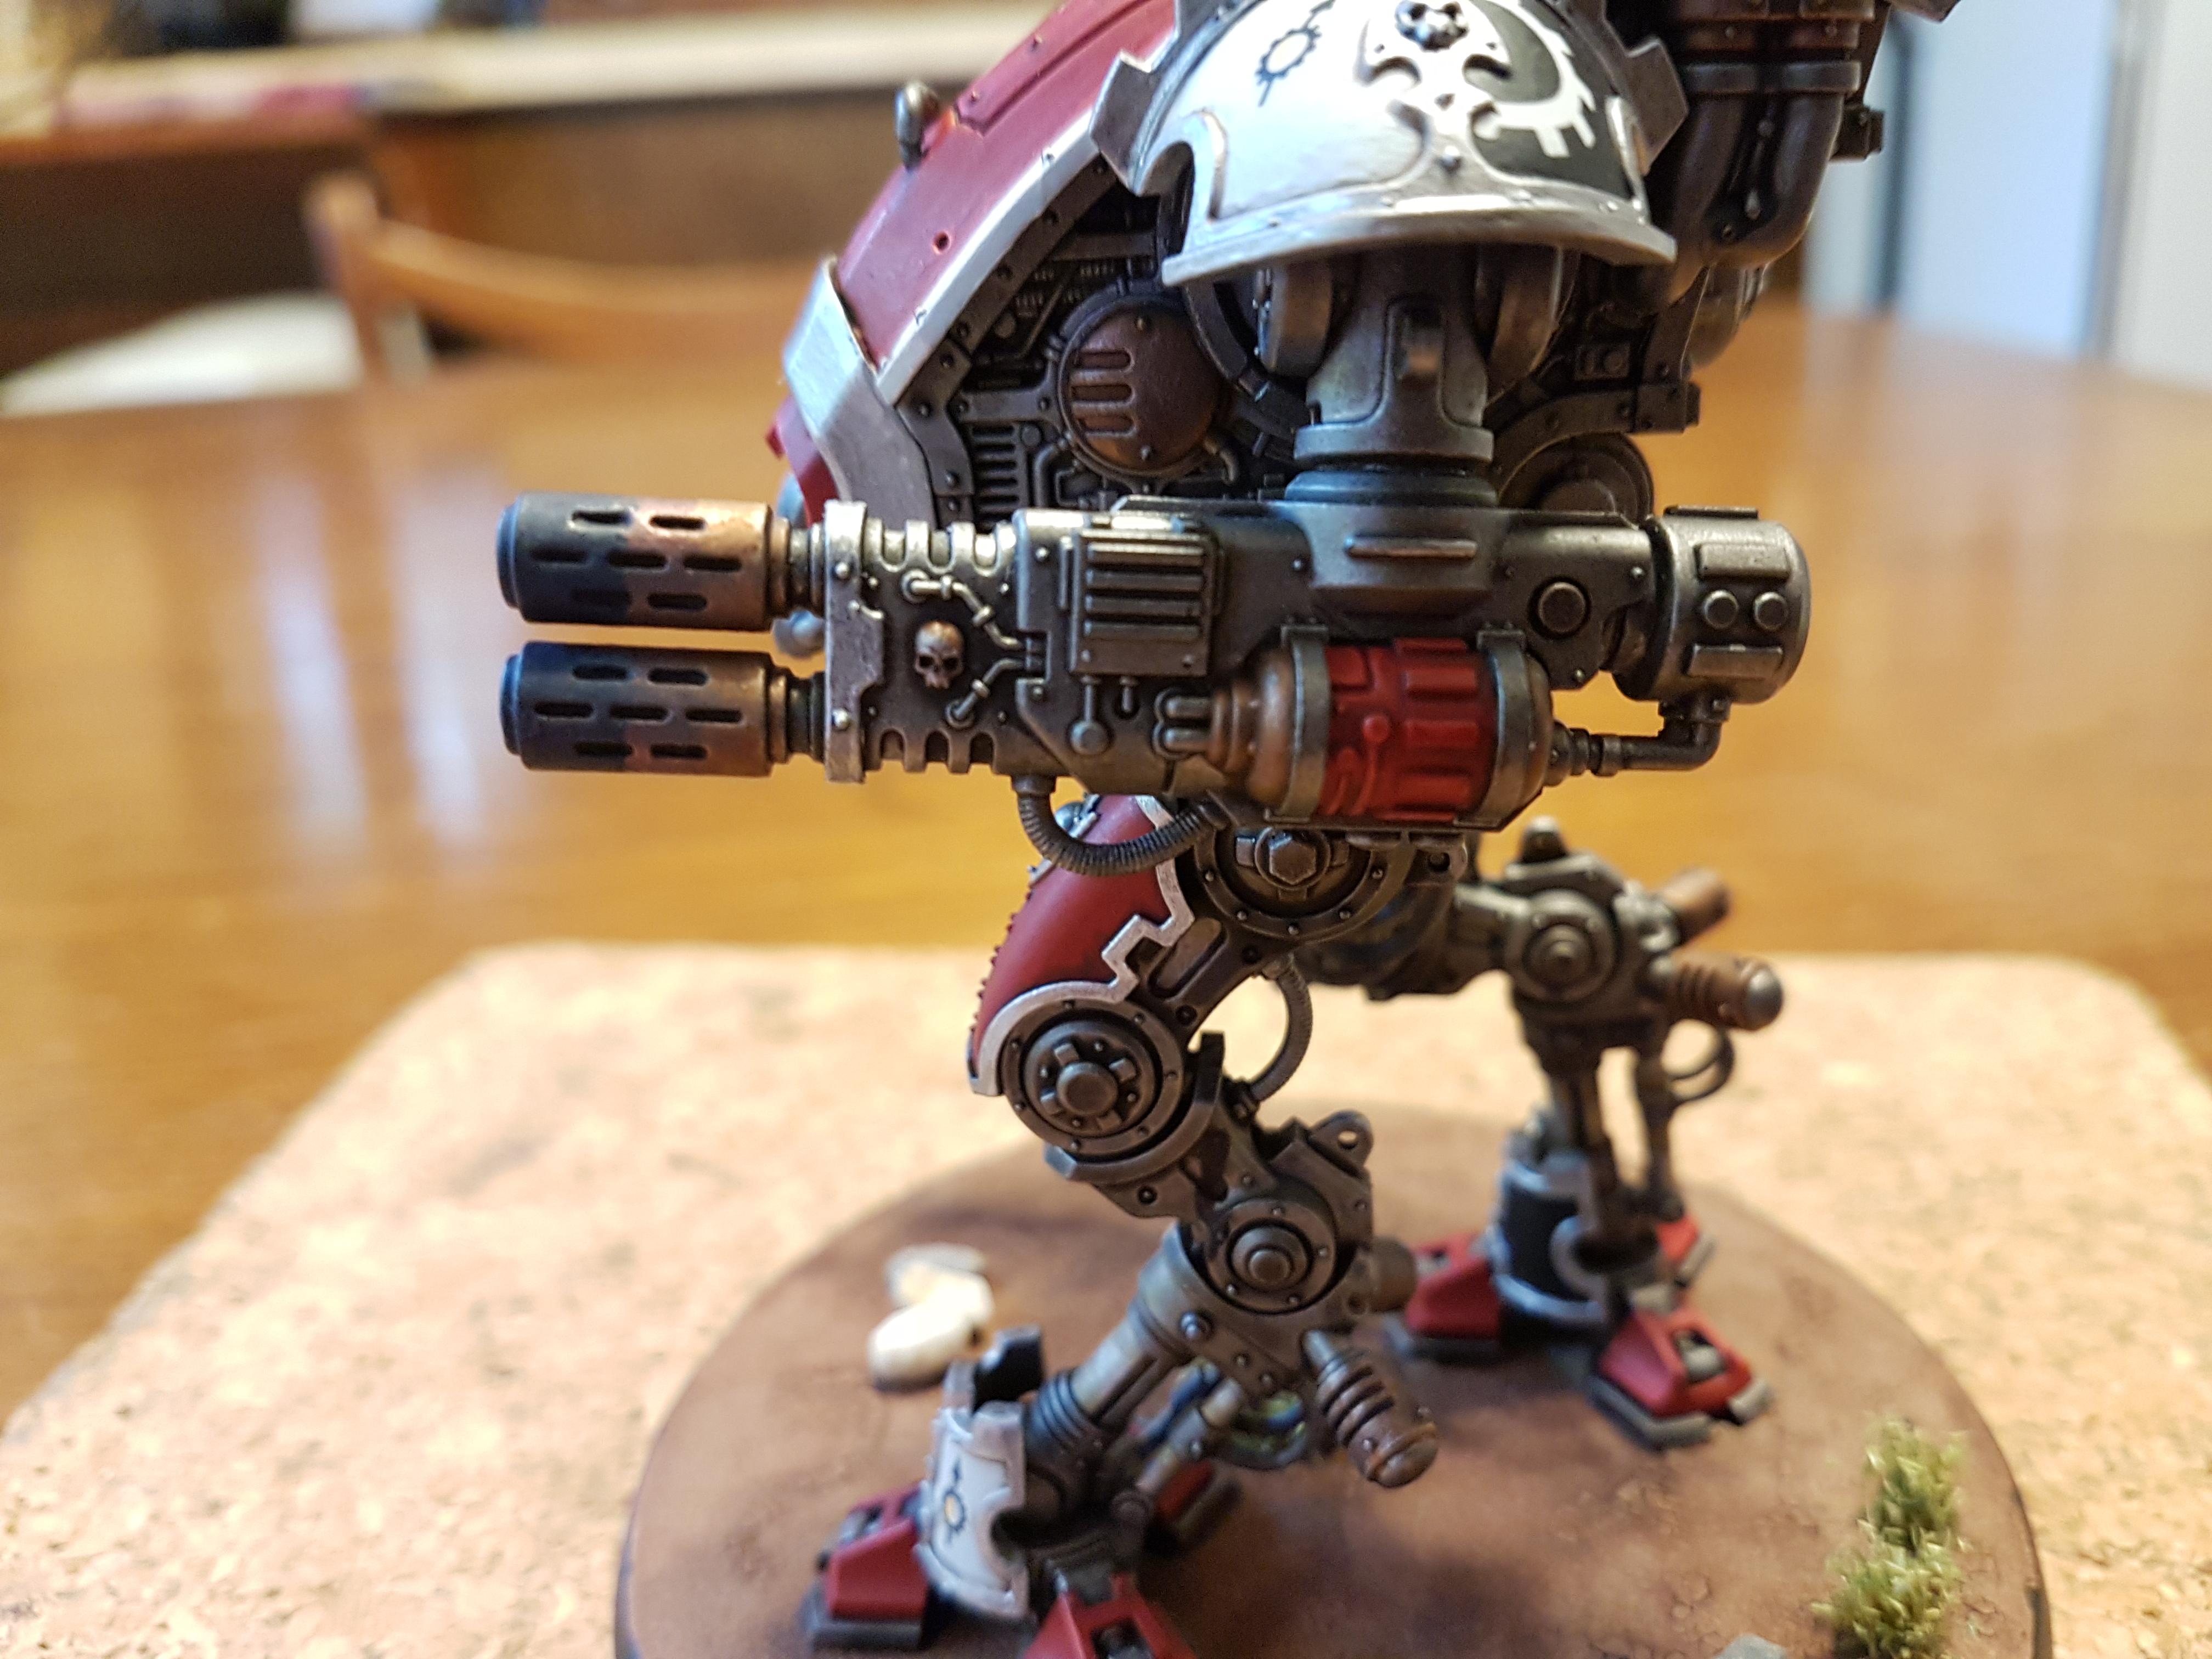 Armiger, Armiger Warglaives, Black, House Taranis, Imperial, Imperial Knights, Knights, Reaper Chain-cleaver, Red, Taranis, Thermal Spear, Warglaives, White